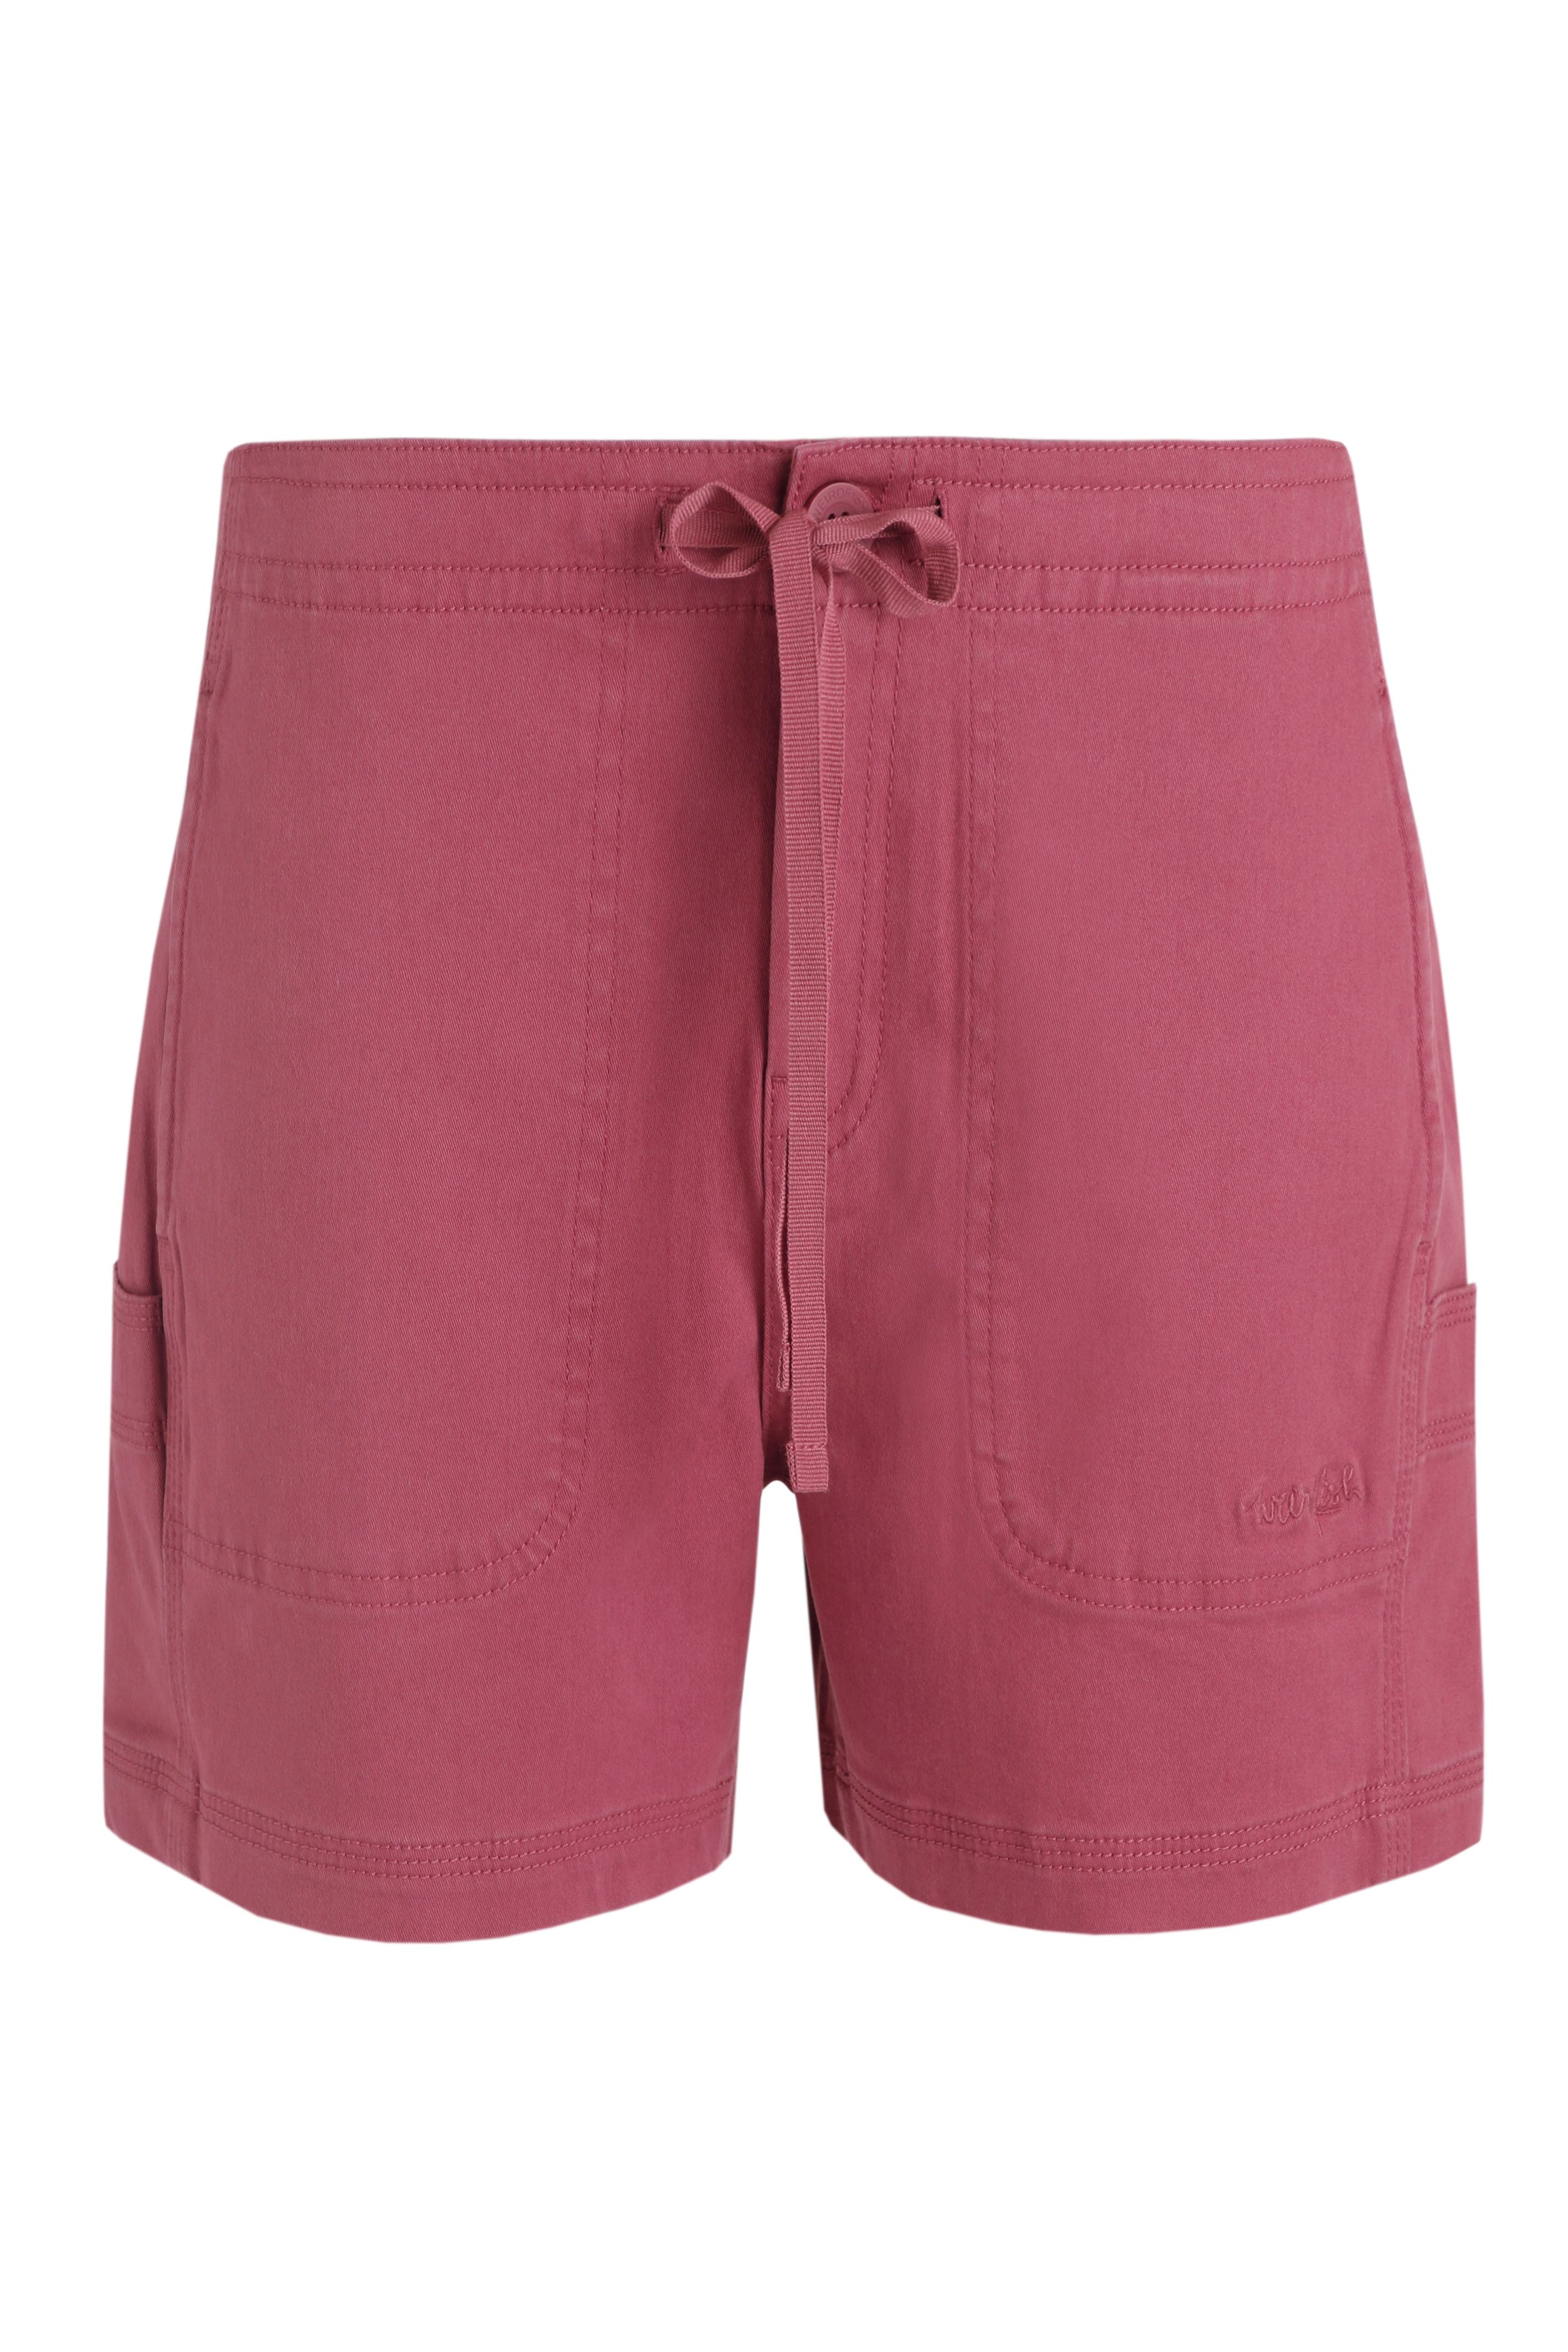 Weird Fish Womens 'Willoughby' Cotton Shorts - Stone – Salt Cellar Clothing